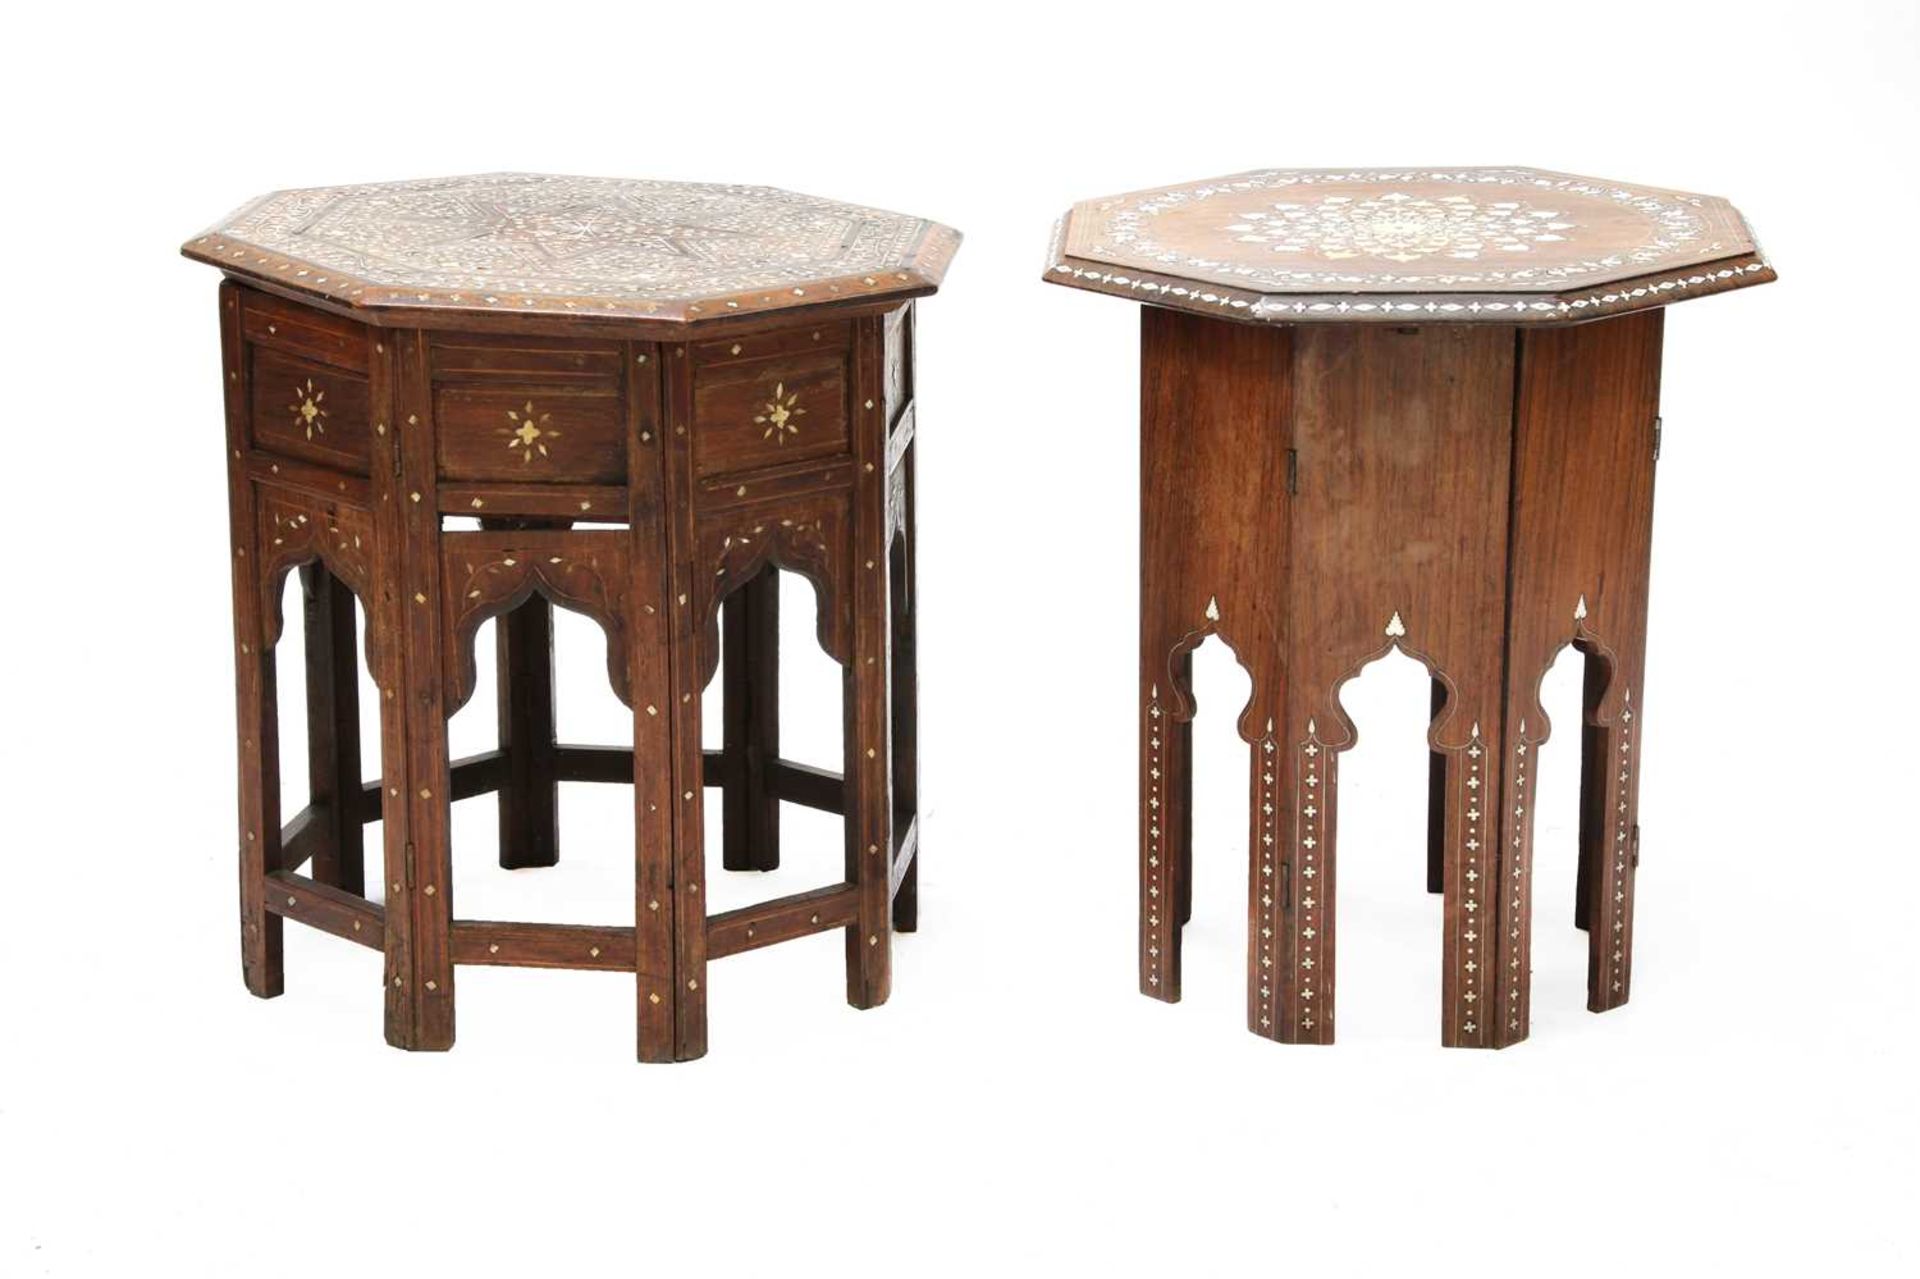 Two small Indian folding octagonal tables, - Image 4 of 5